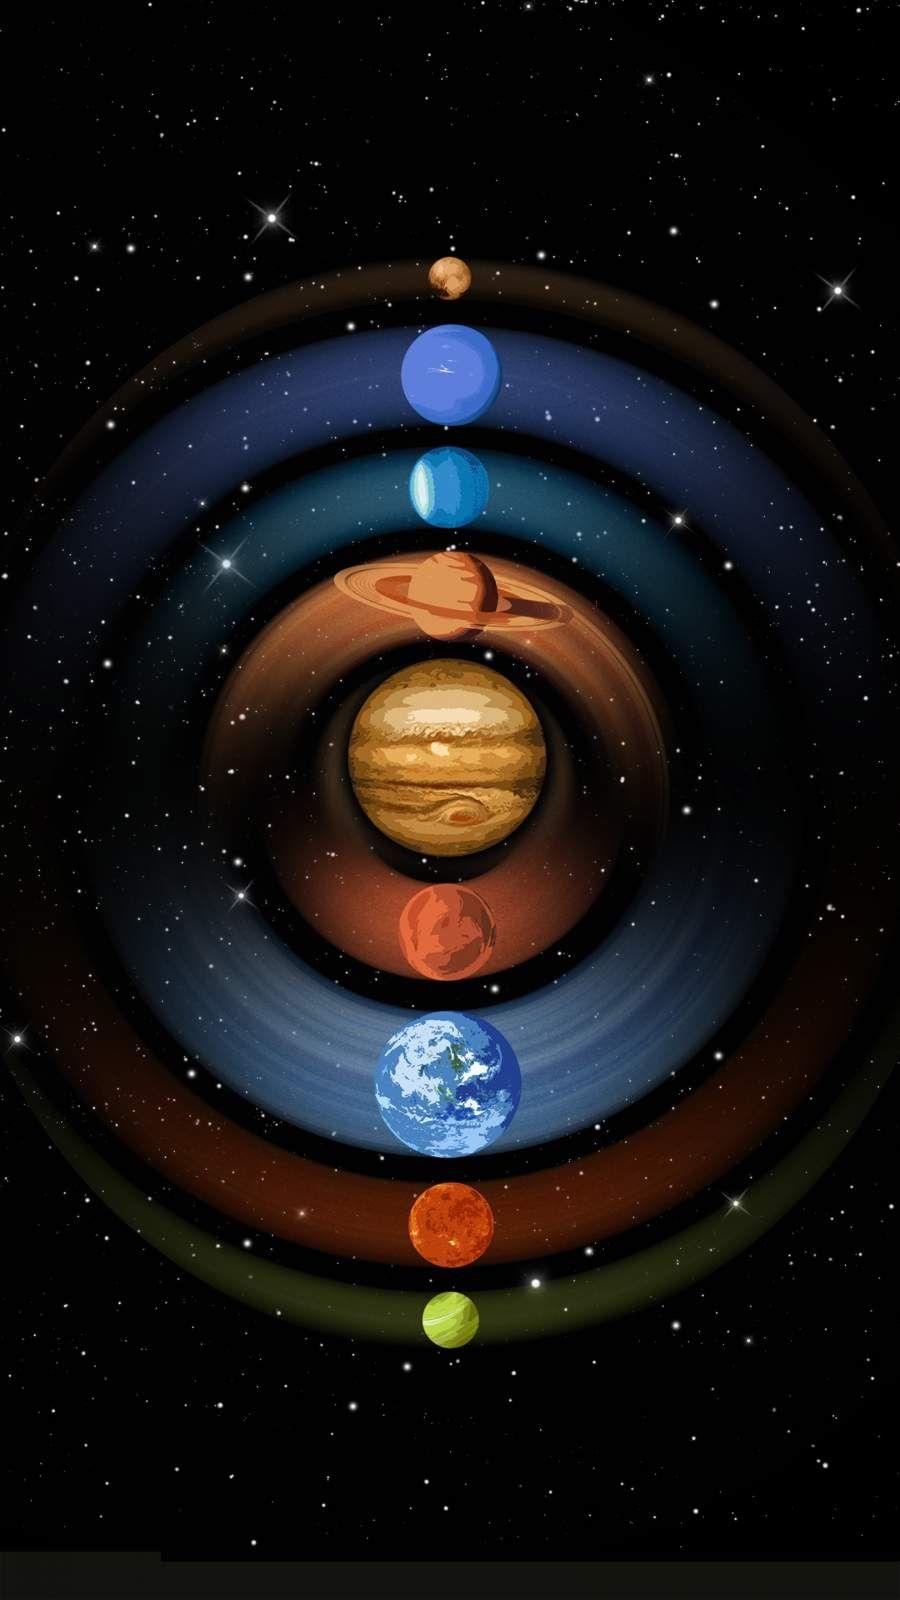 Solar System iPhone Wallpapers - Top Free Solar System iPhone